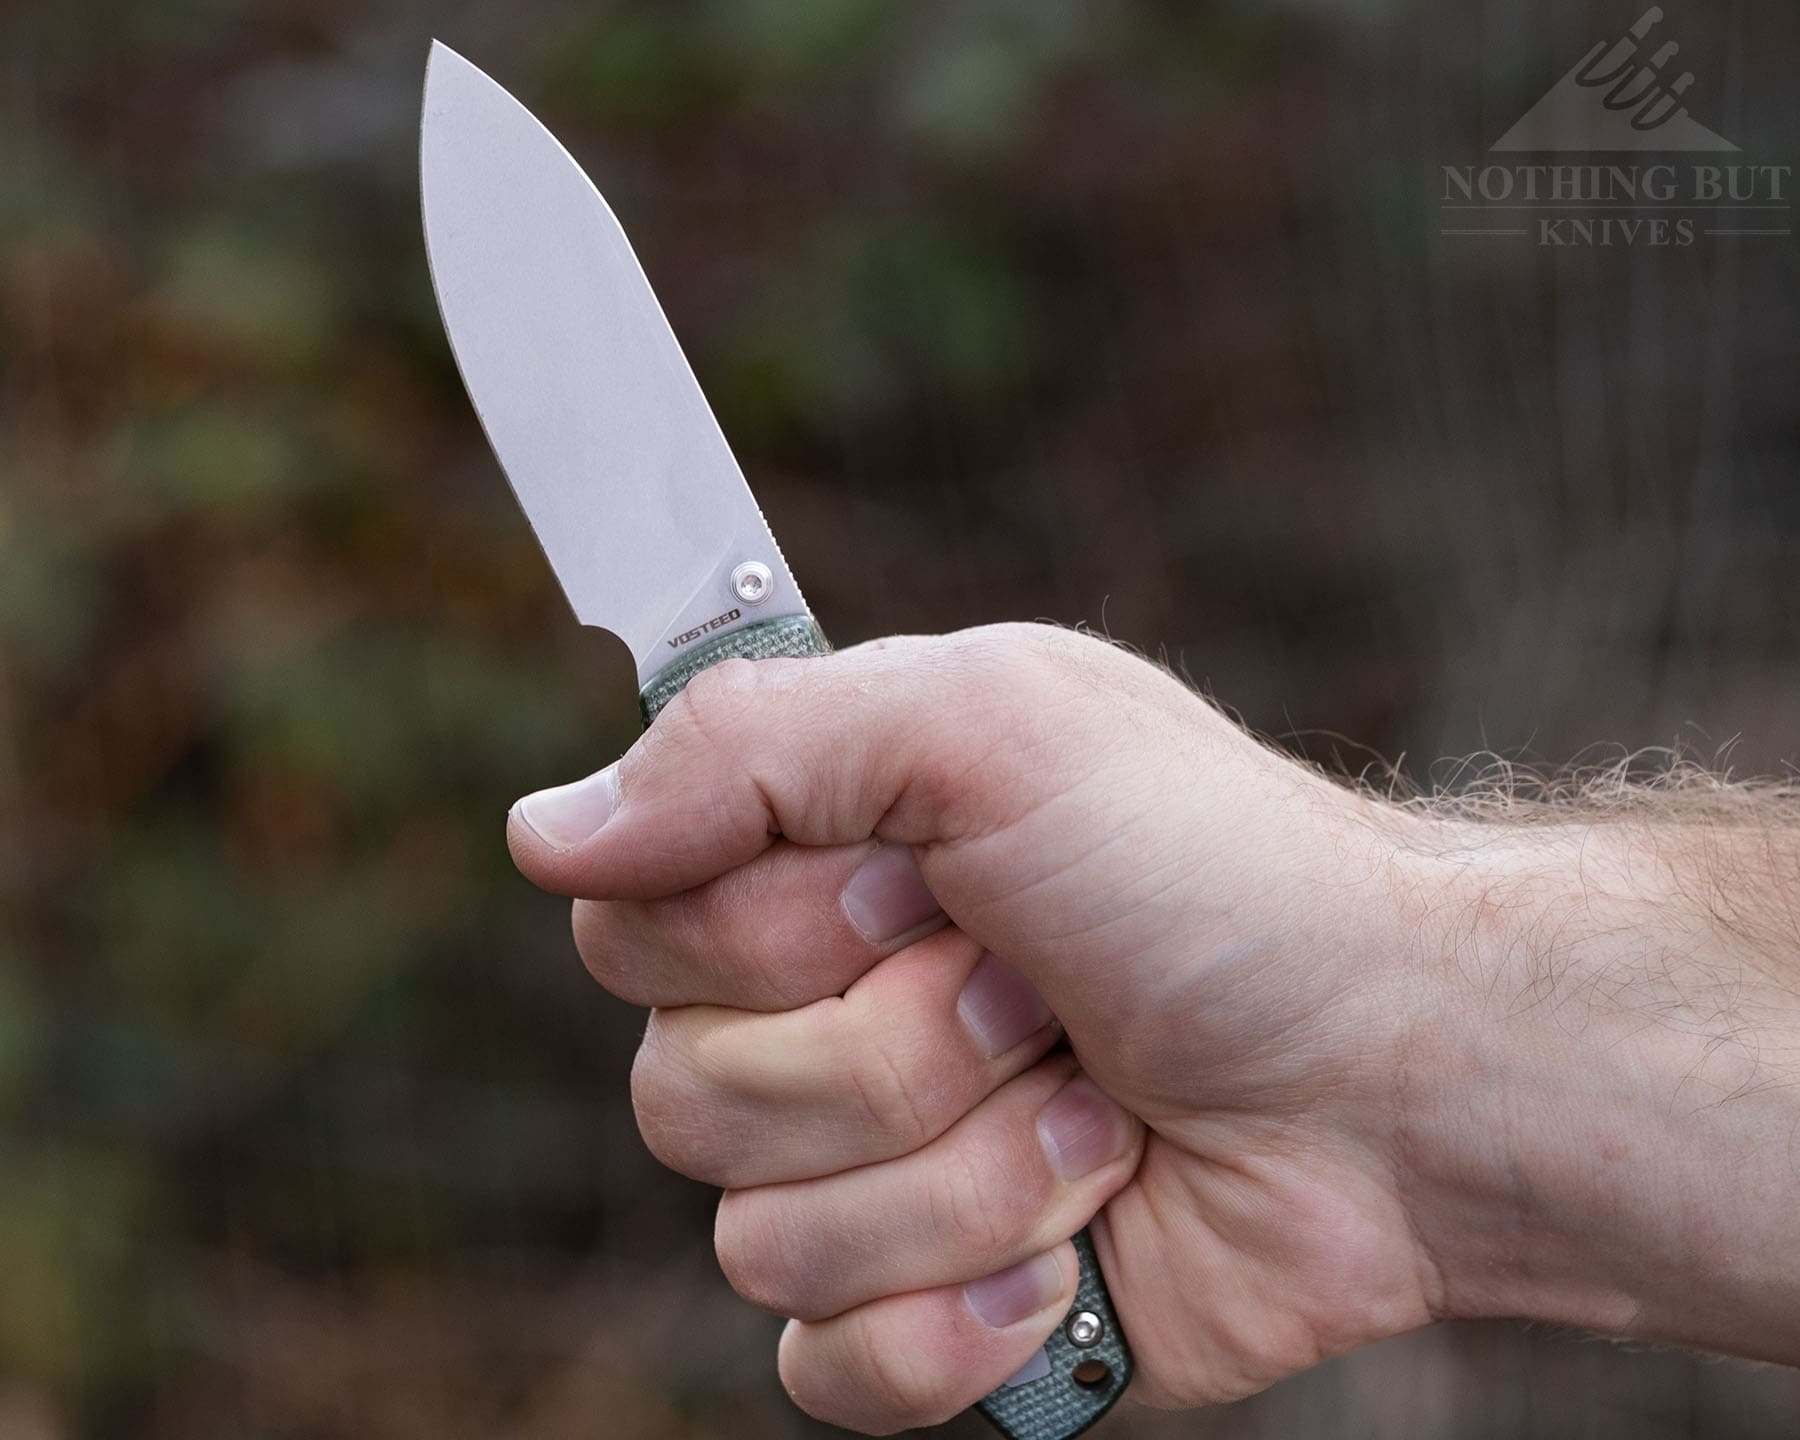 The handle of the Vosteed Racoon is comfortable and easy to grip, but it does feel like the lock could be accidently disengaged when the knife is held in certain grips. 